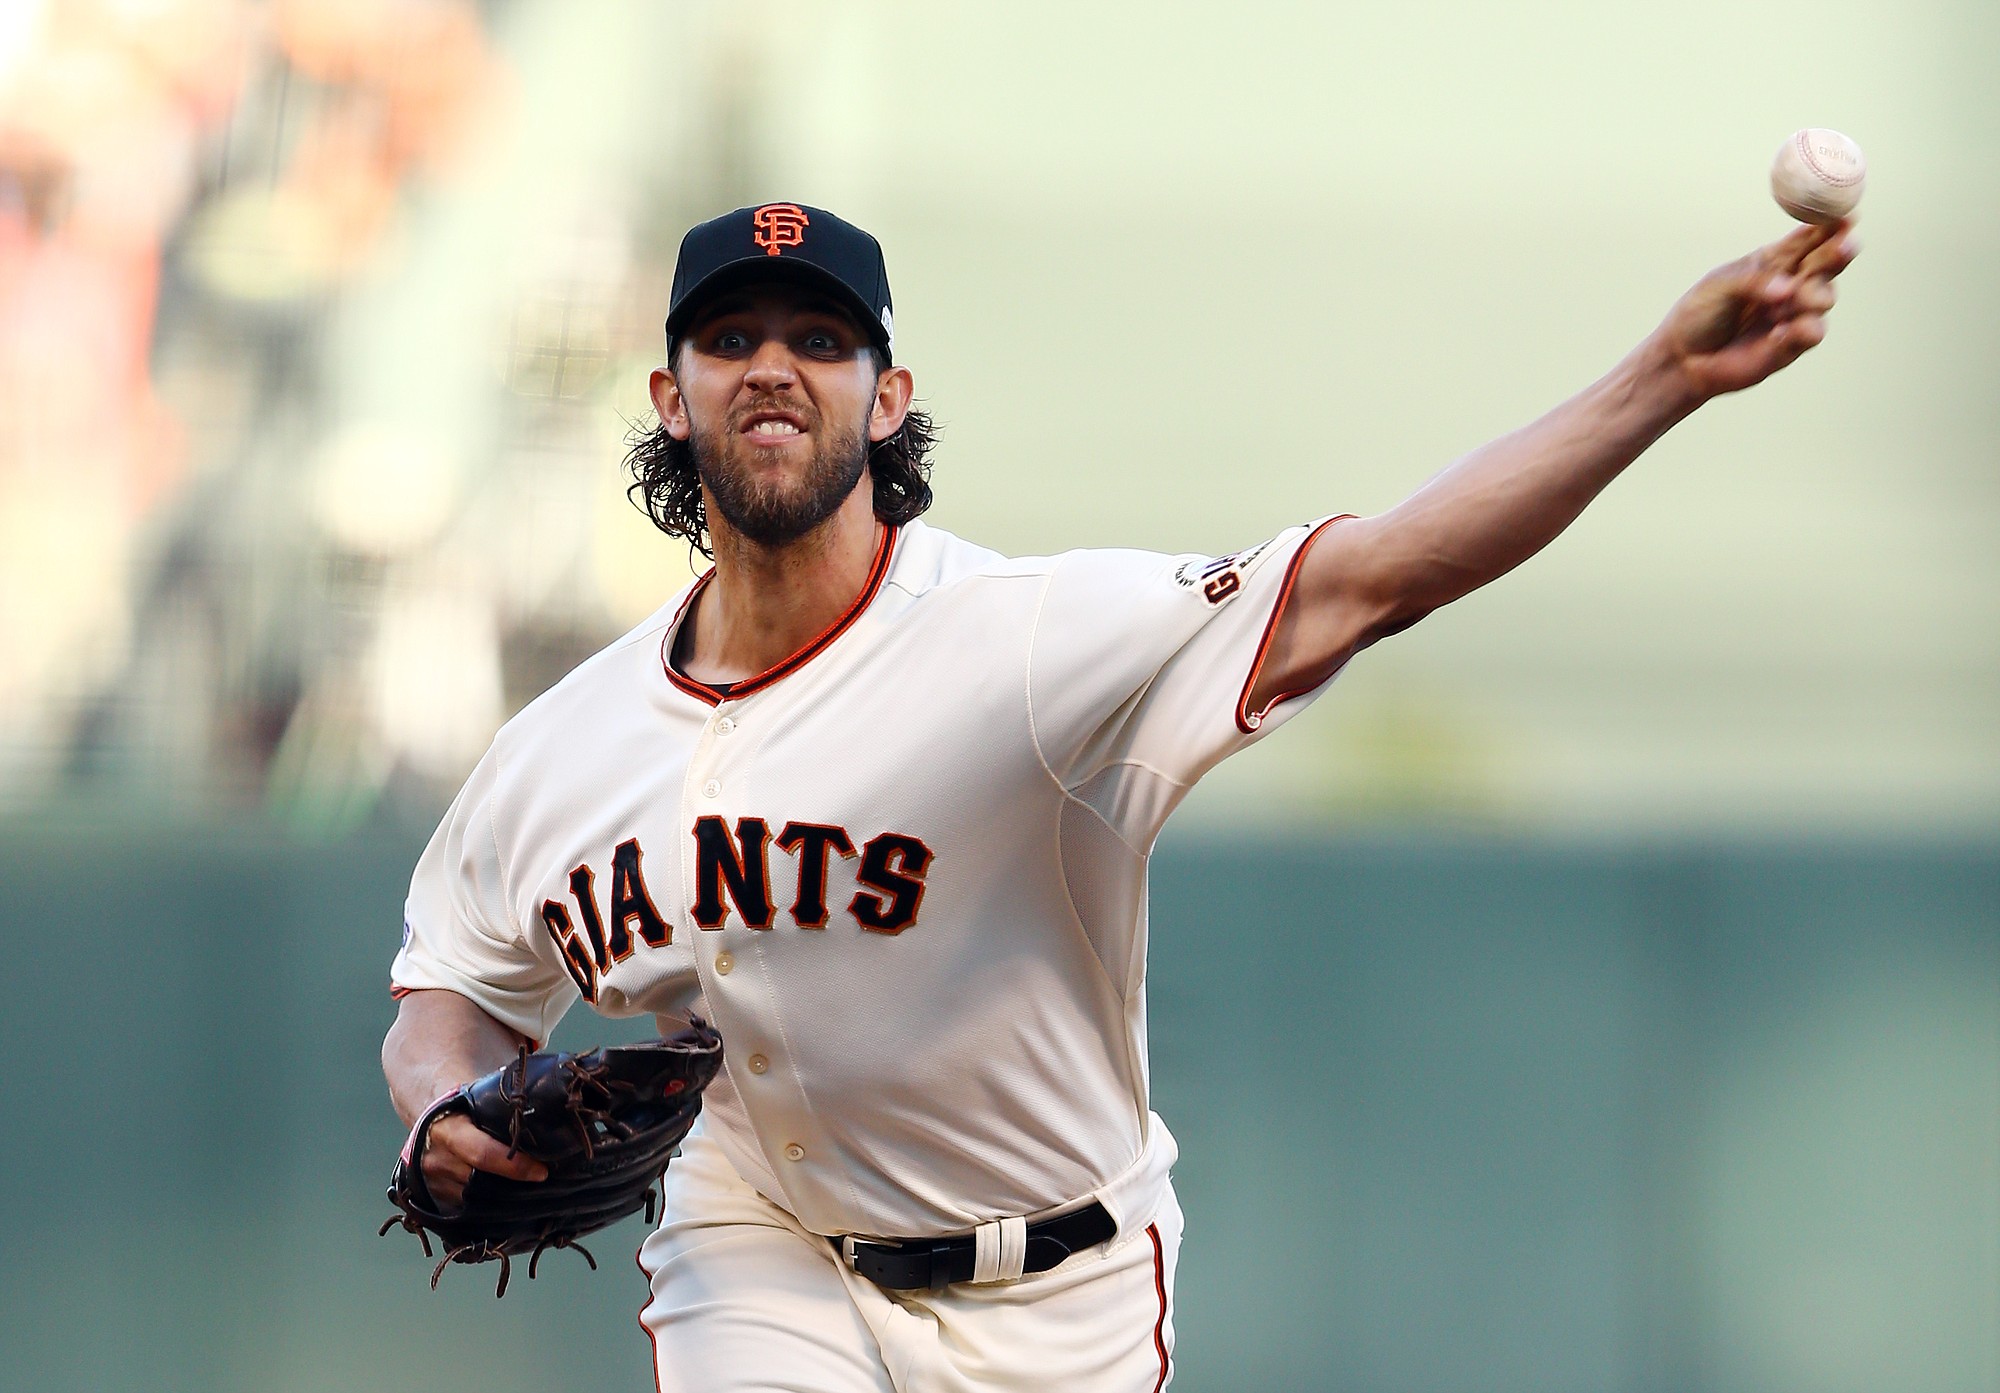 San Francisco Giants pitcher Madison Bumgarner held the Kansas City Royals to four hits over nine shut-out innings, while striking out eight in Game 5 of the World Series Sunday, Oct. 26, 2014, in San Francisco.